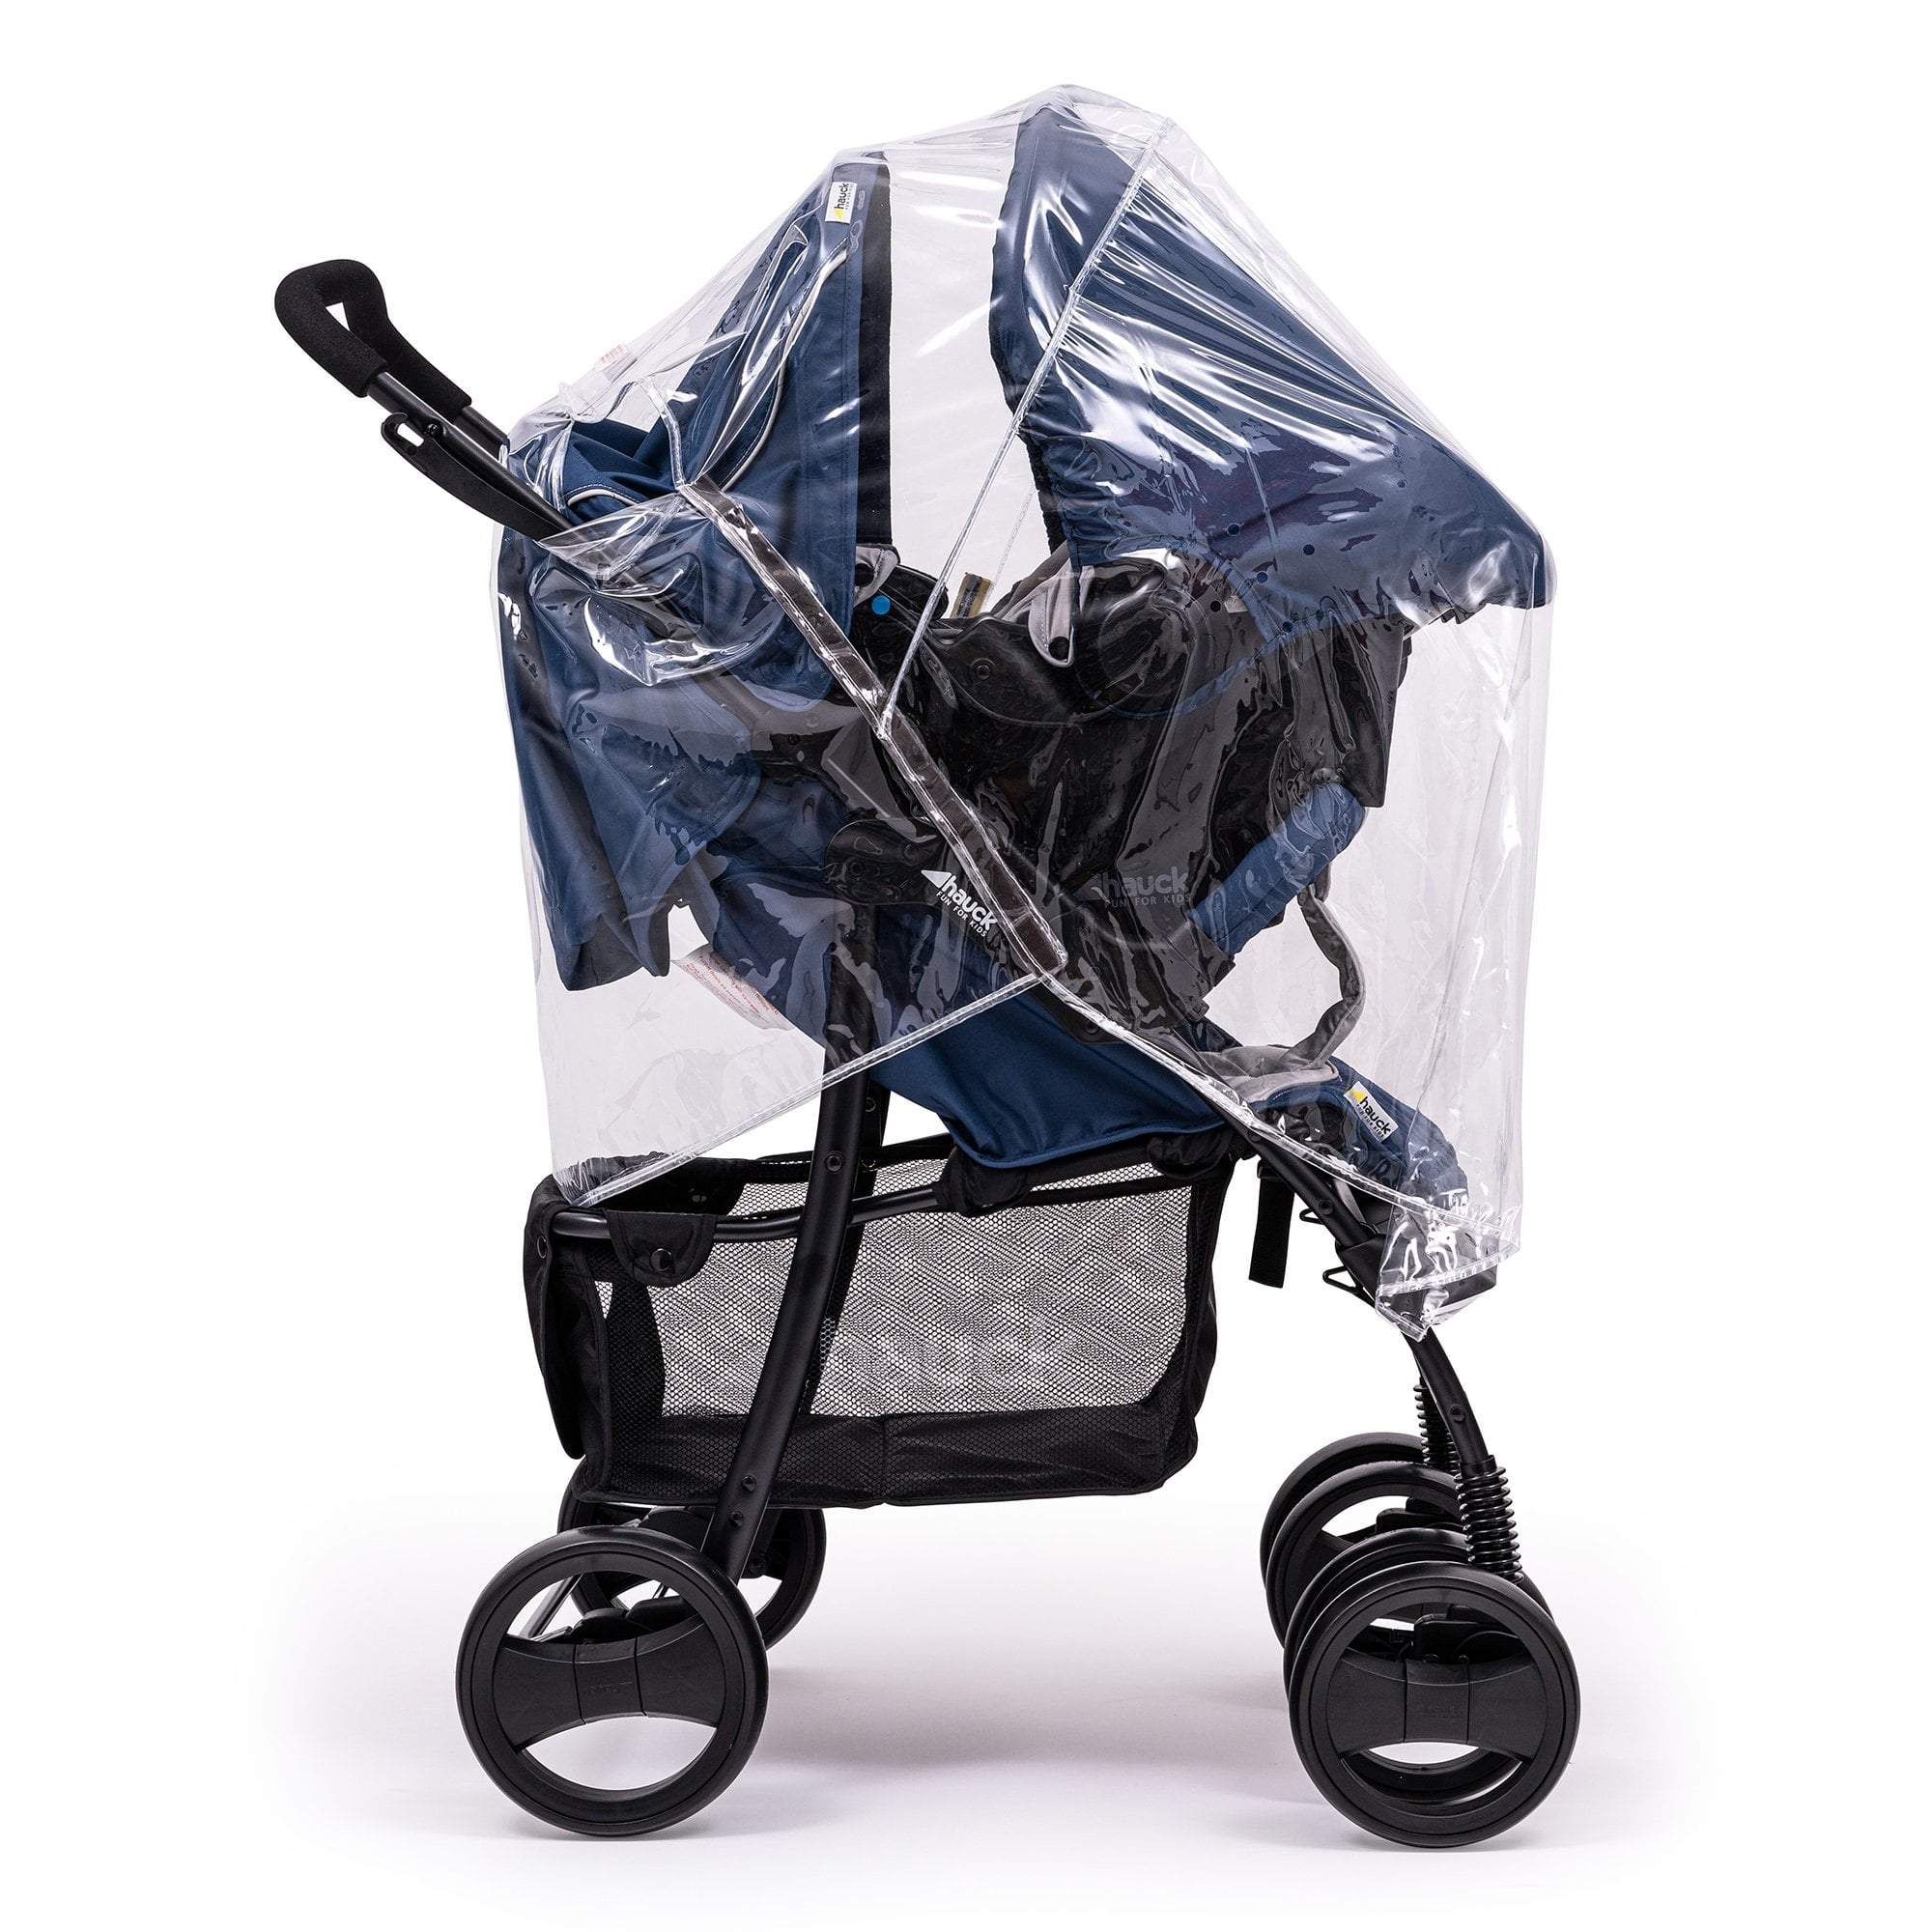 Travel System Raincover Compatible with Koelstra - Fits All Models - For Your Little One